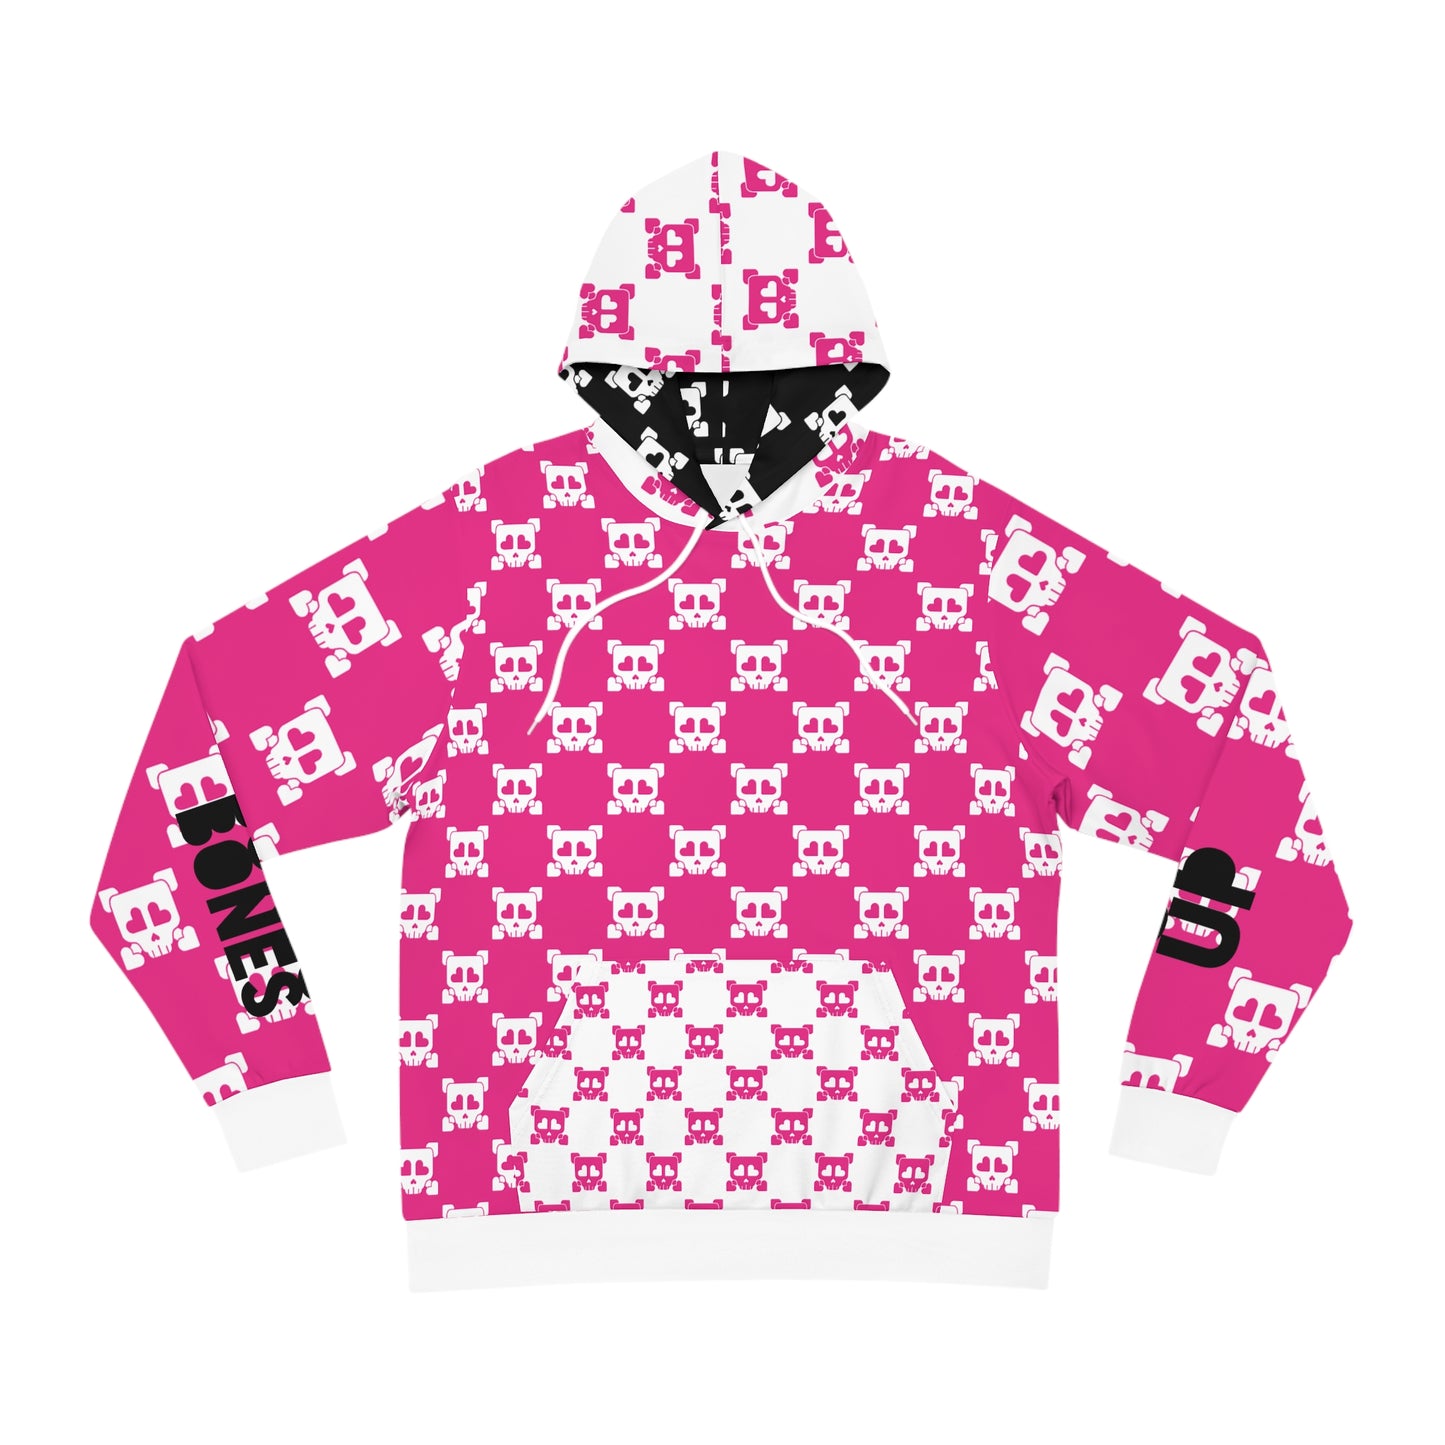 B-Side Bones Up Hoodie - Pink and White v1